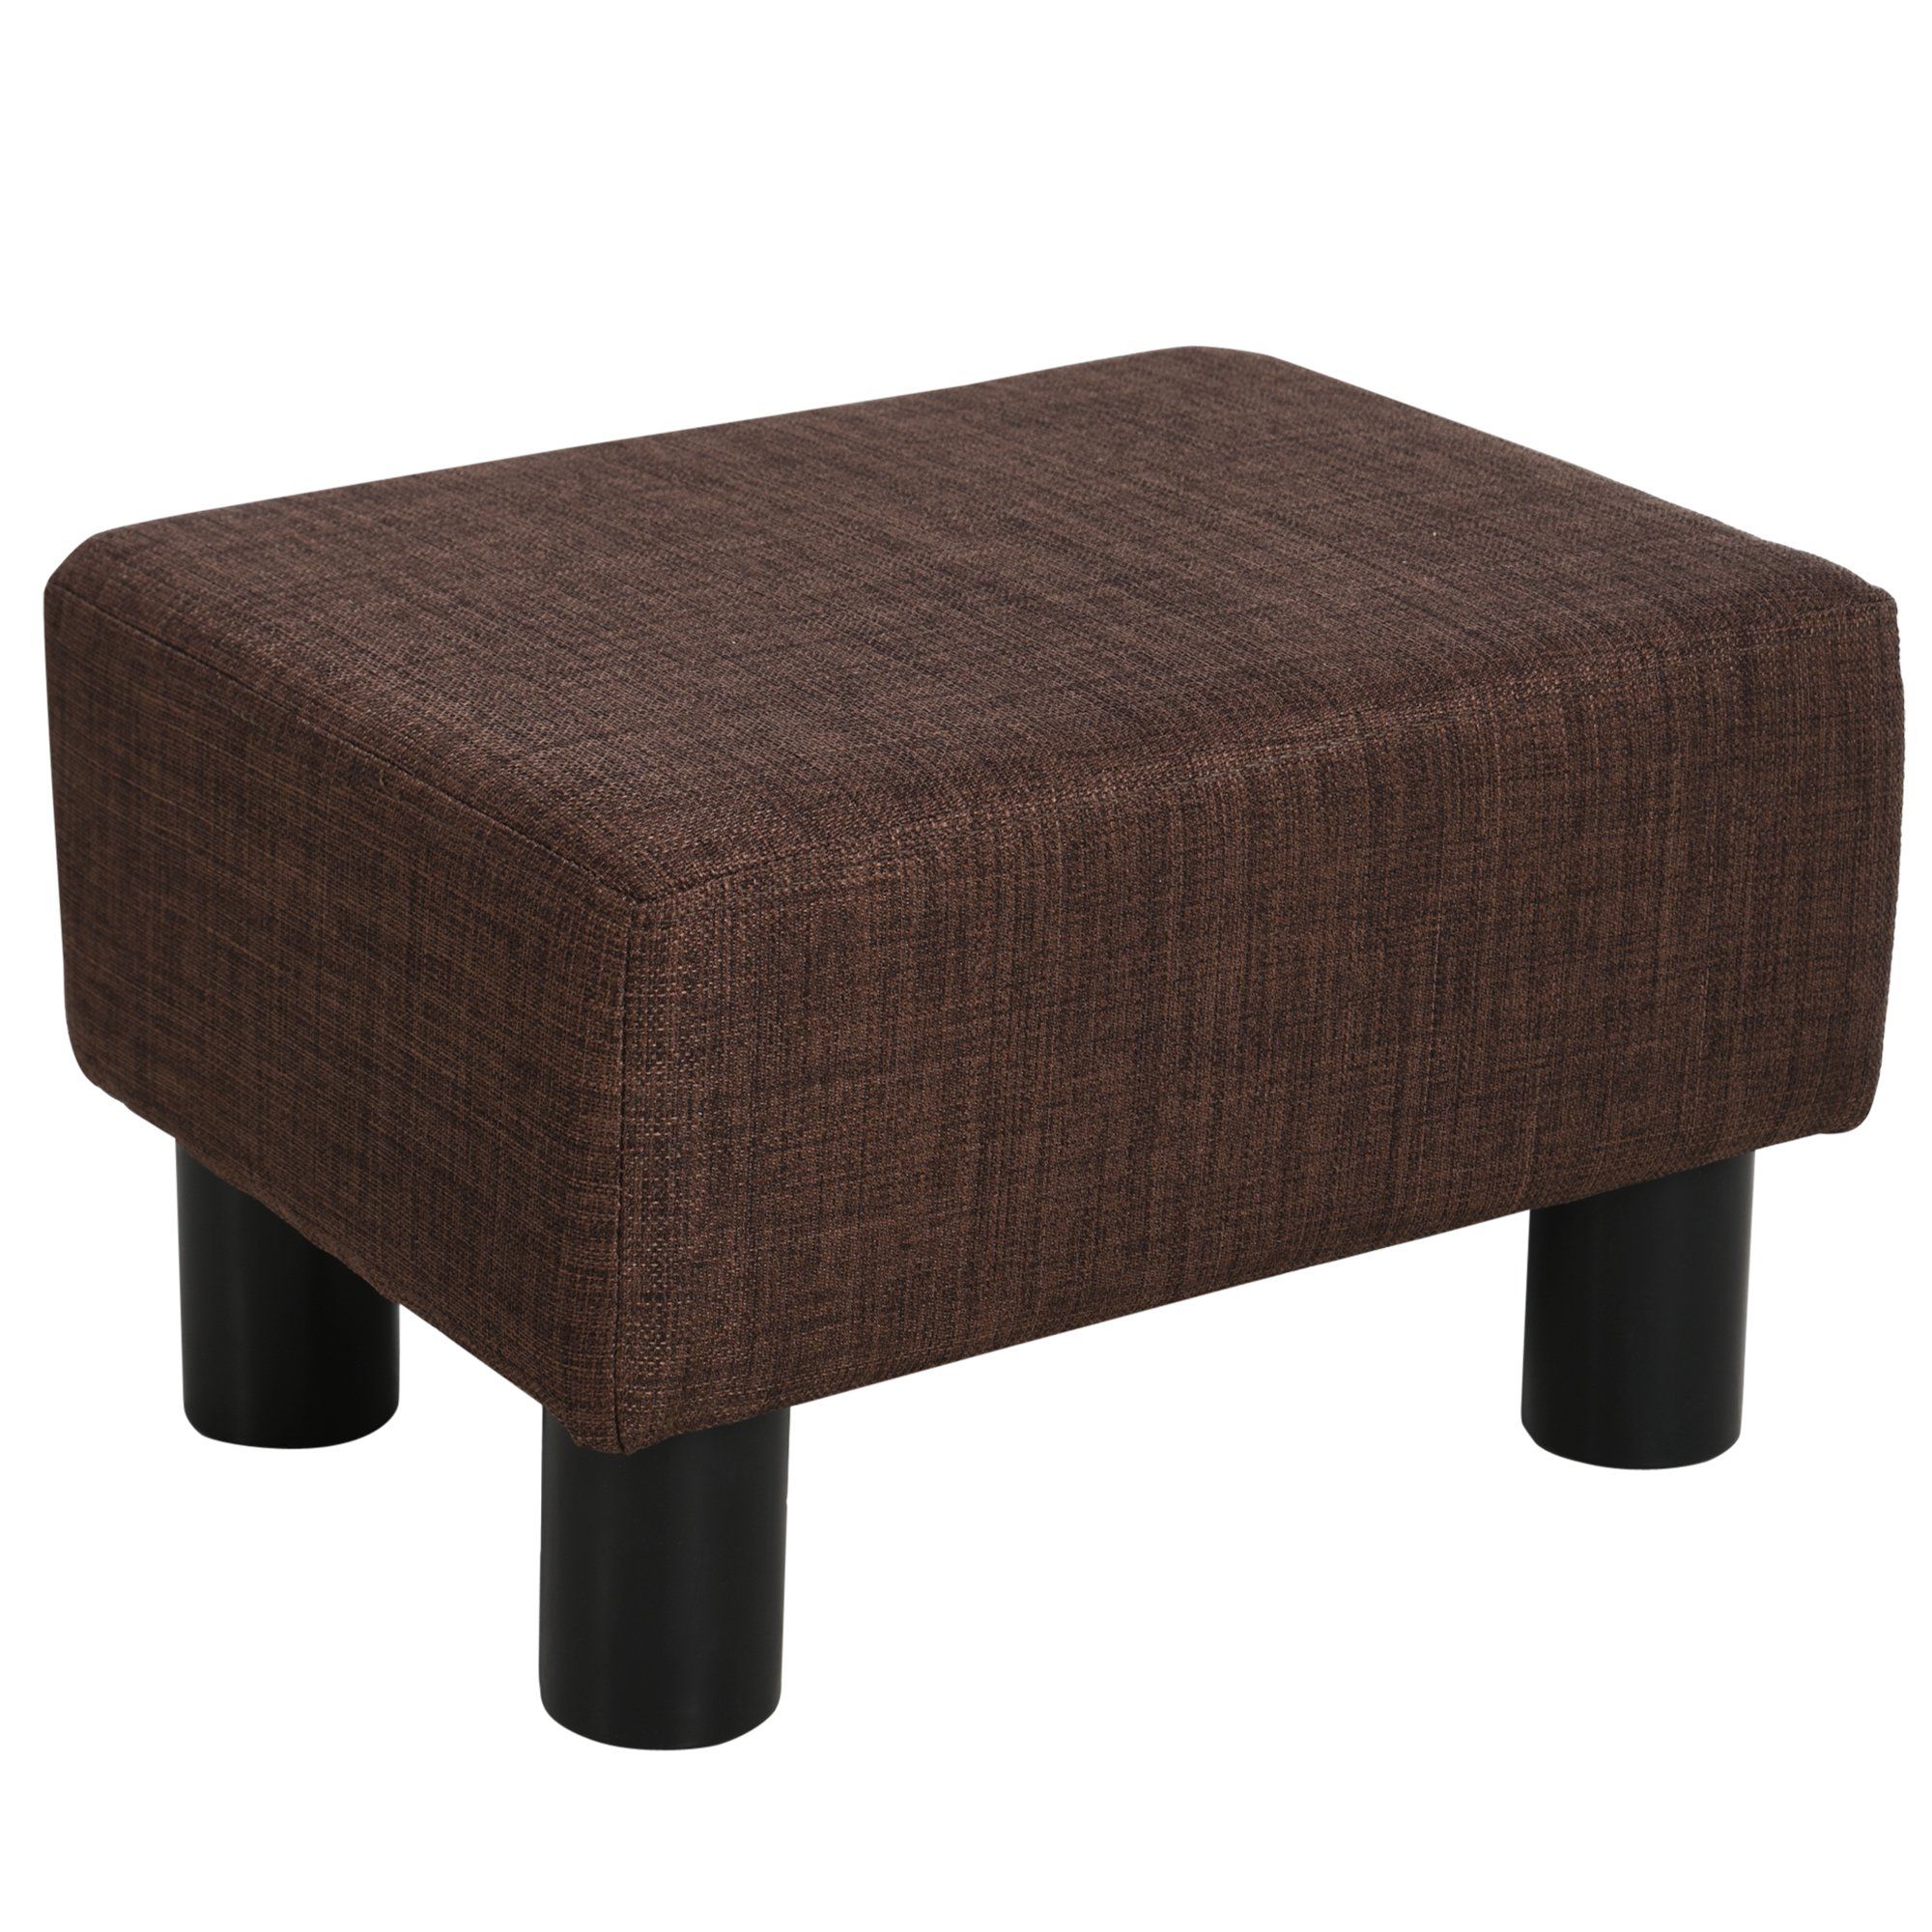 Widely Used Solid Cuboid Pouf Ottomans Inside Homcom Linen Fabric Footstool Ottoman Cube W/ 4 Plastic Legs Black (View 2 of 10)